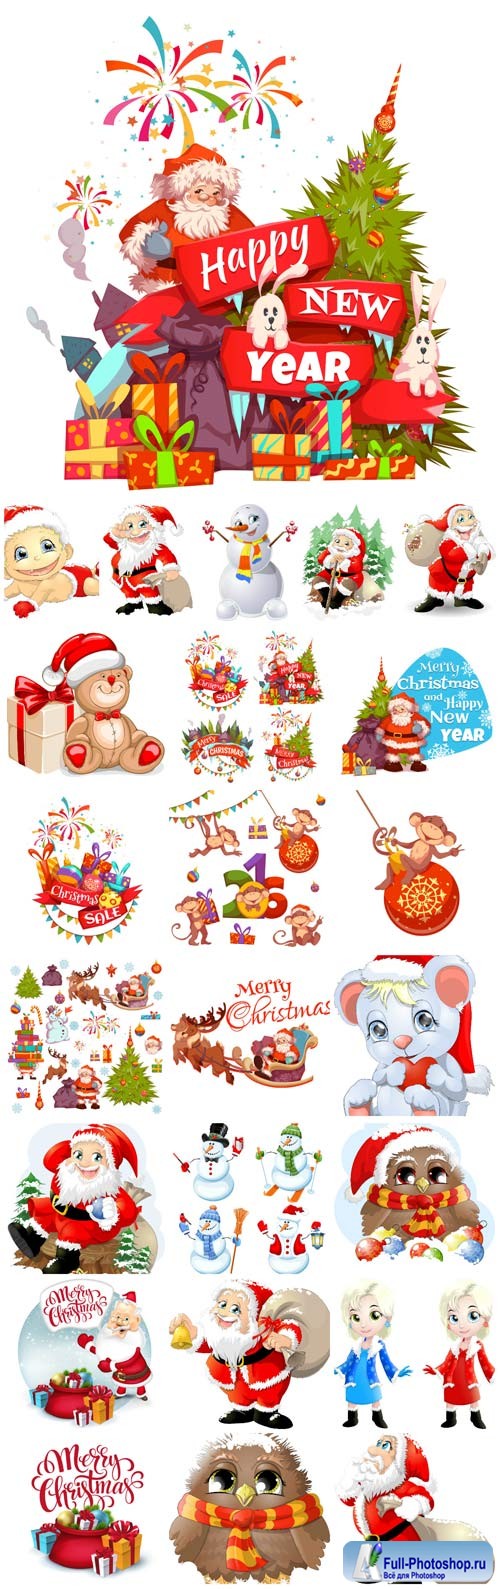 New Year and Christmas illustrations in vector 42